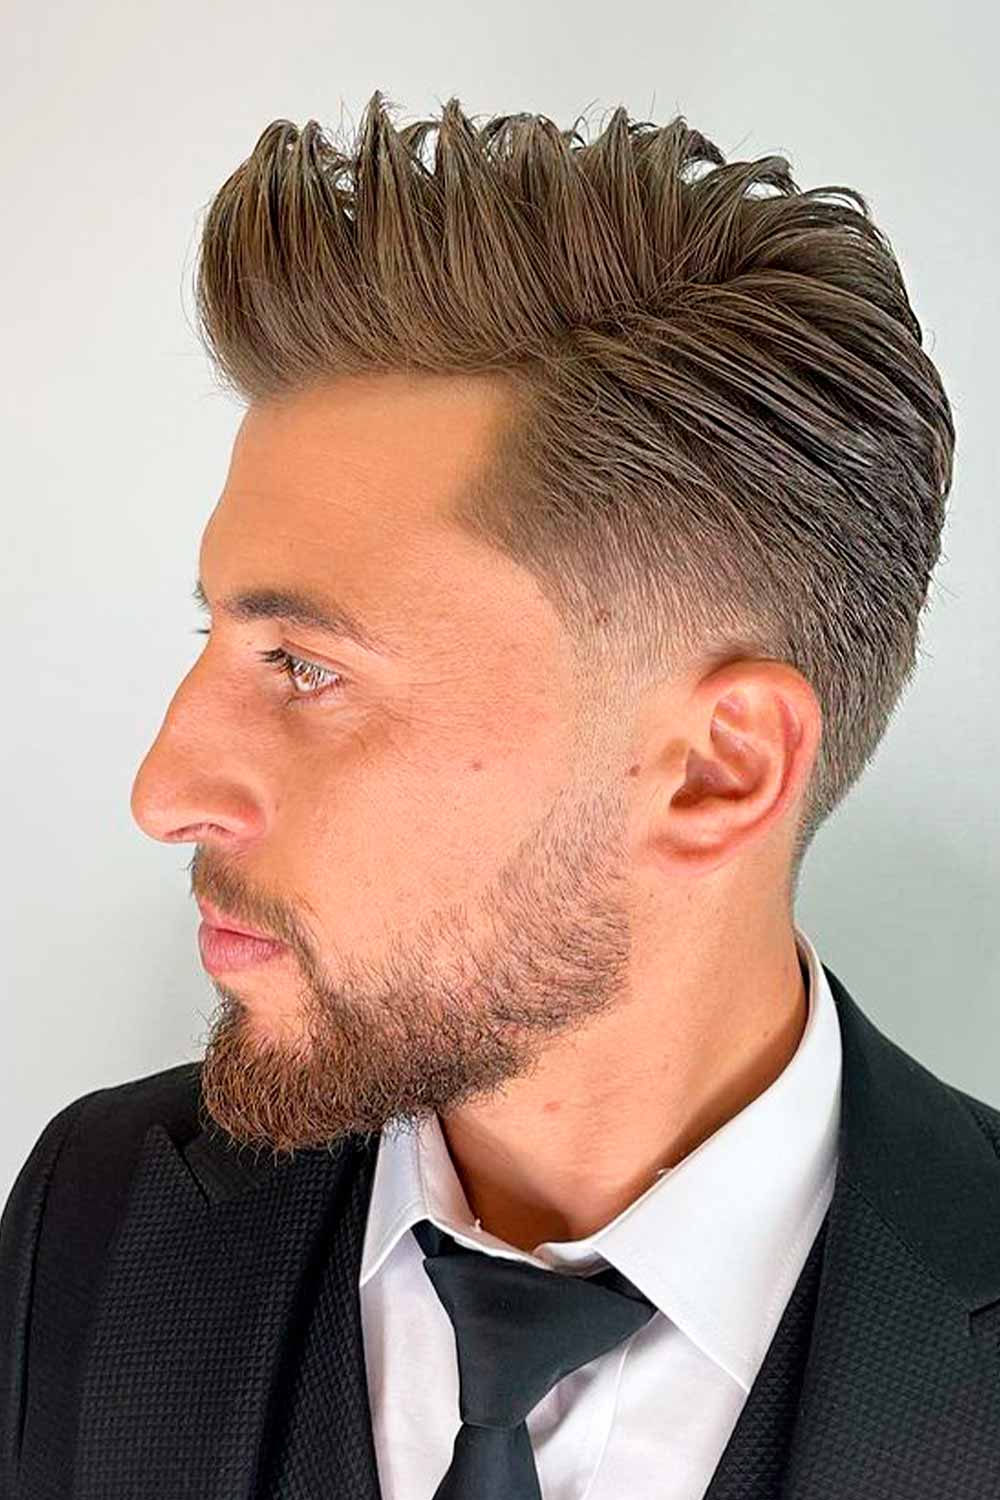 Classic Taper Haircut With Side Parting #taper #taperhaircut #taperedhair #taperedhaircut